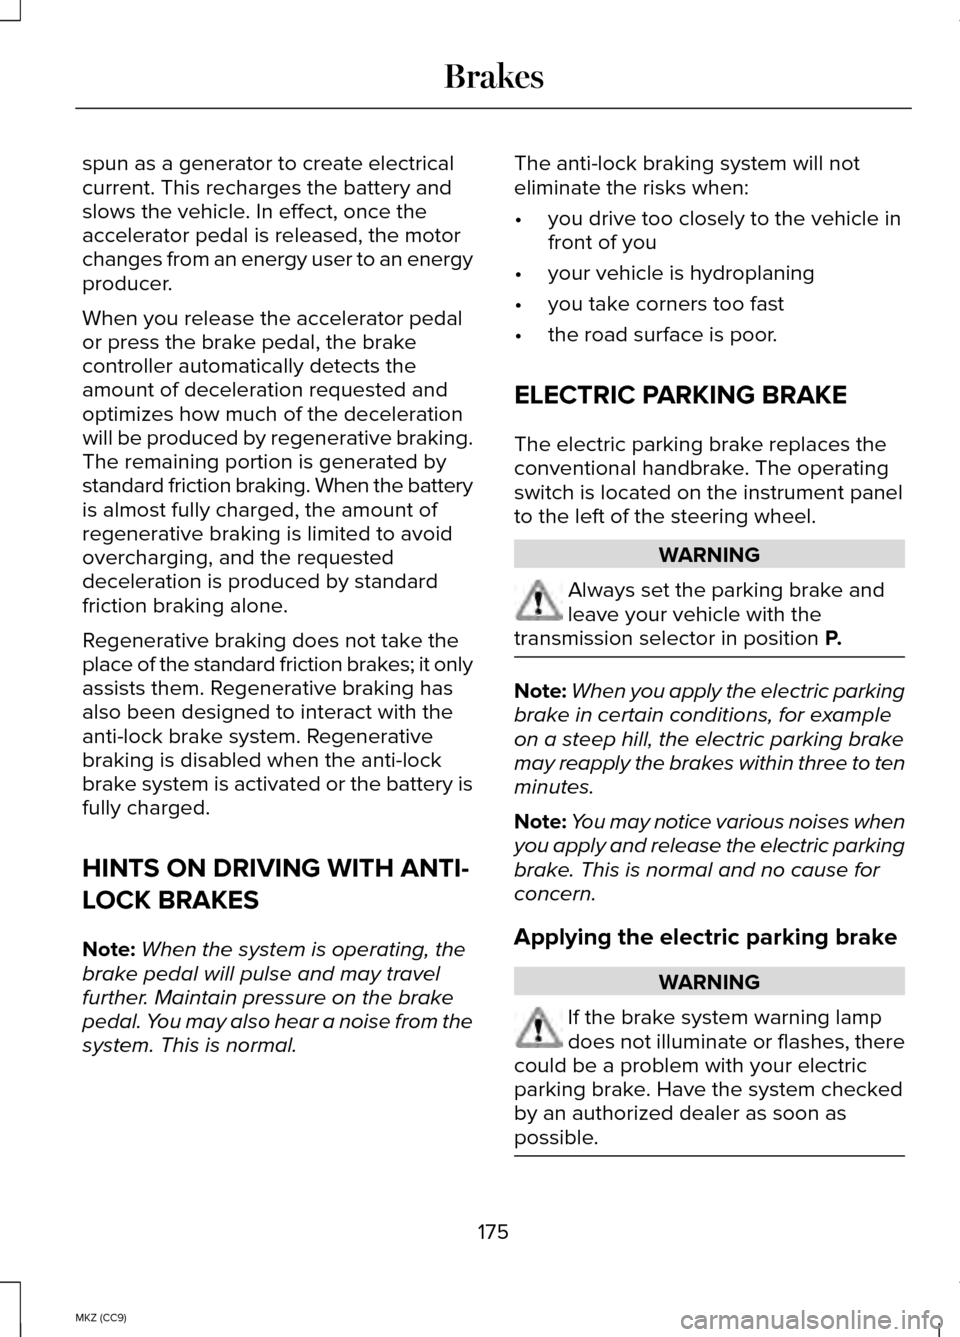 LINCOLN MKZ HYBRID 2014  Owners Manual spun as a generator to create electrical
current. This recharges the battery and
slows the vehicle. In effect, once the
accelerator pedal is released, the motor
changes from an energy user to an energ